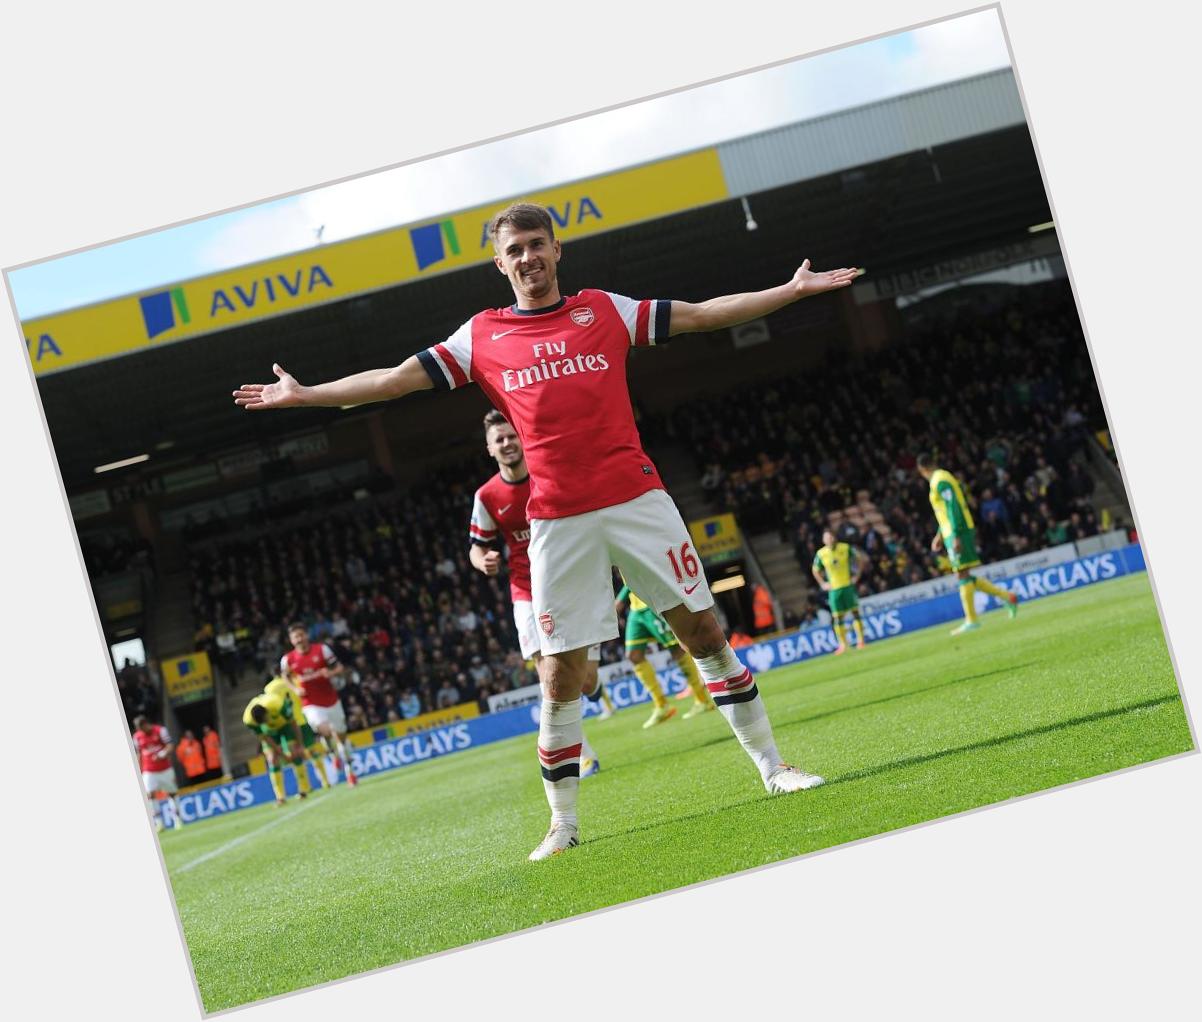 Happy 24th birthday to Aaron Ramsey and get well soon! 